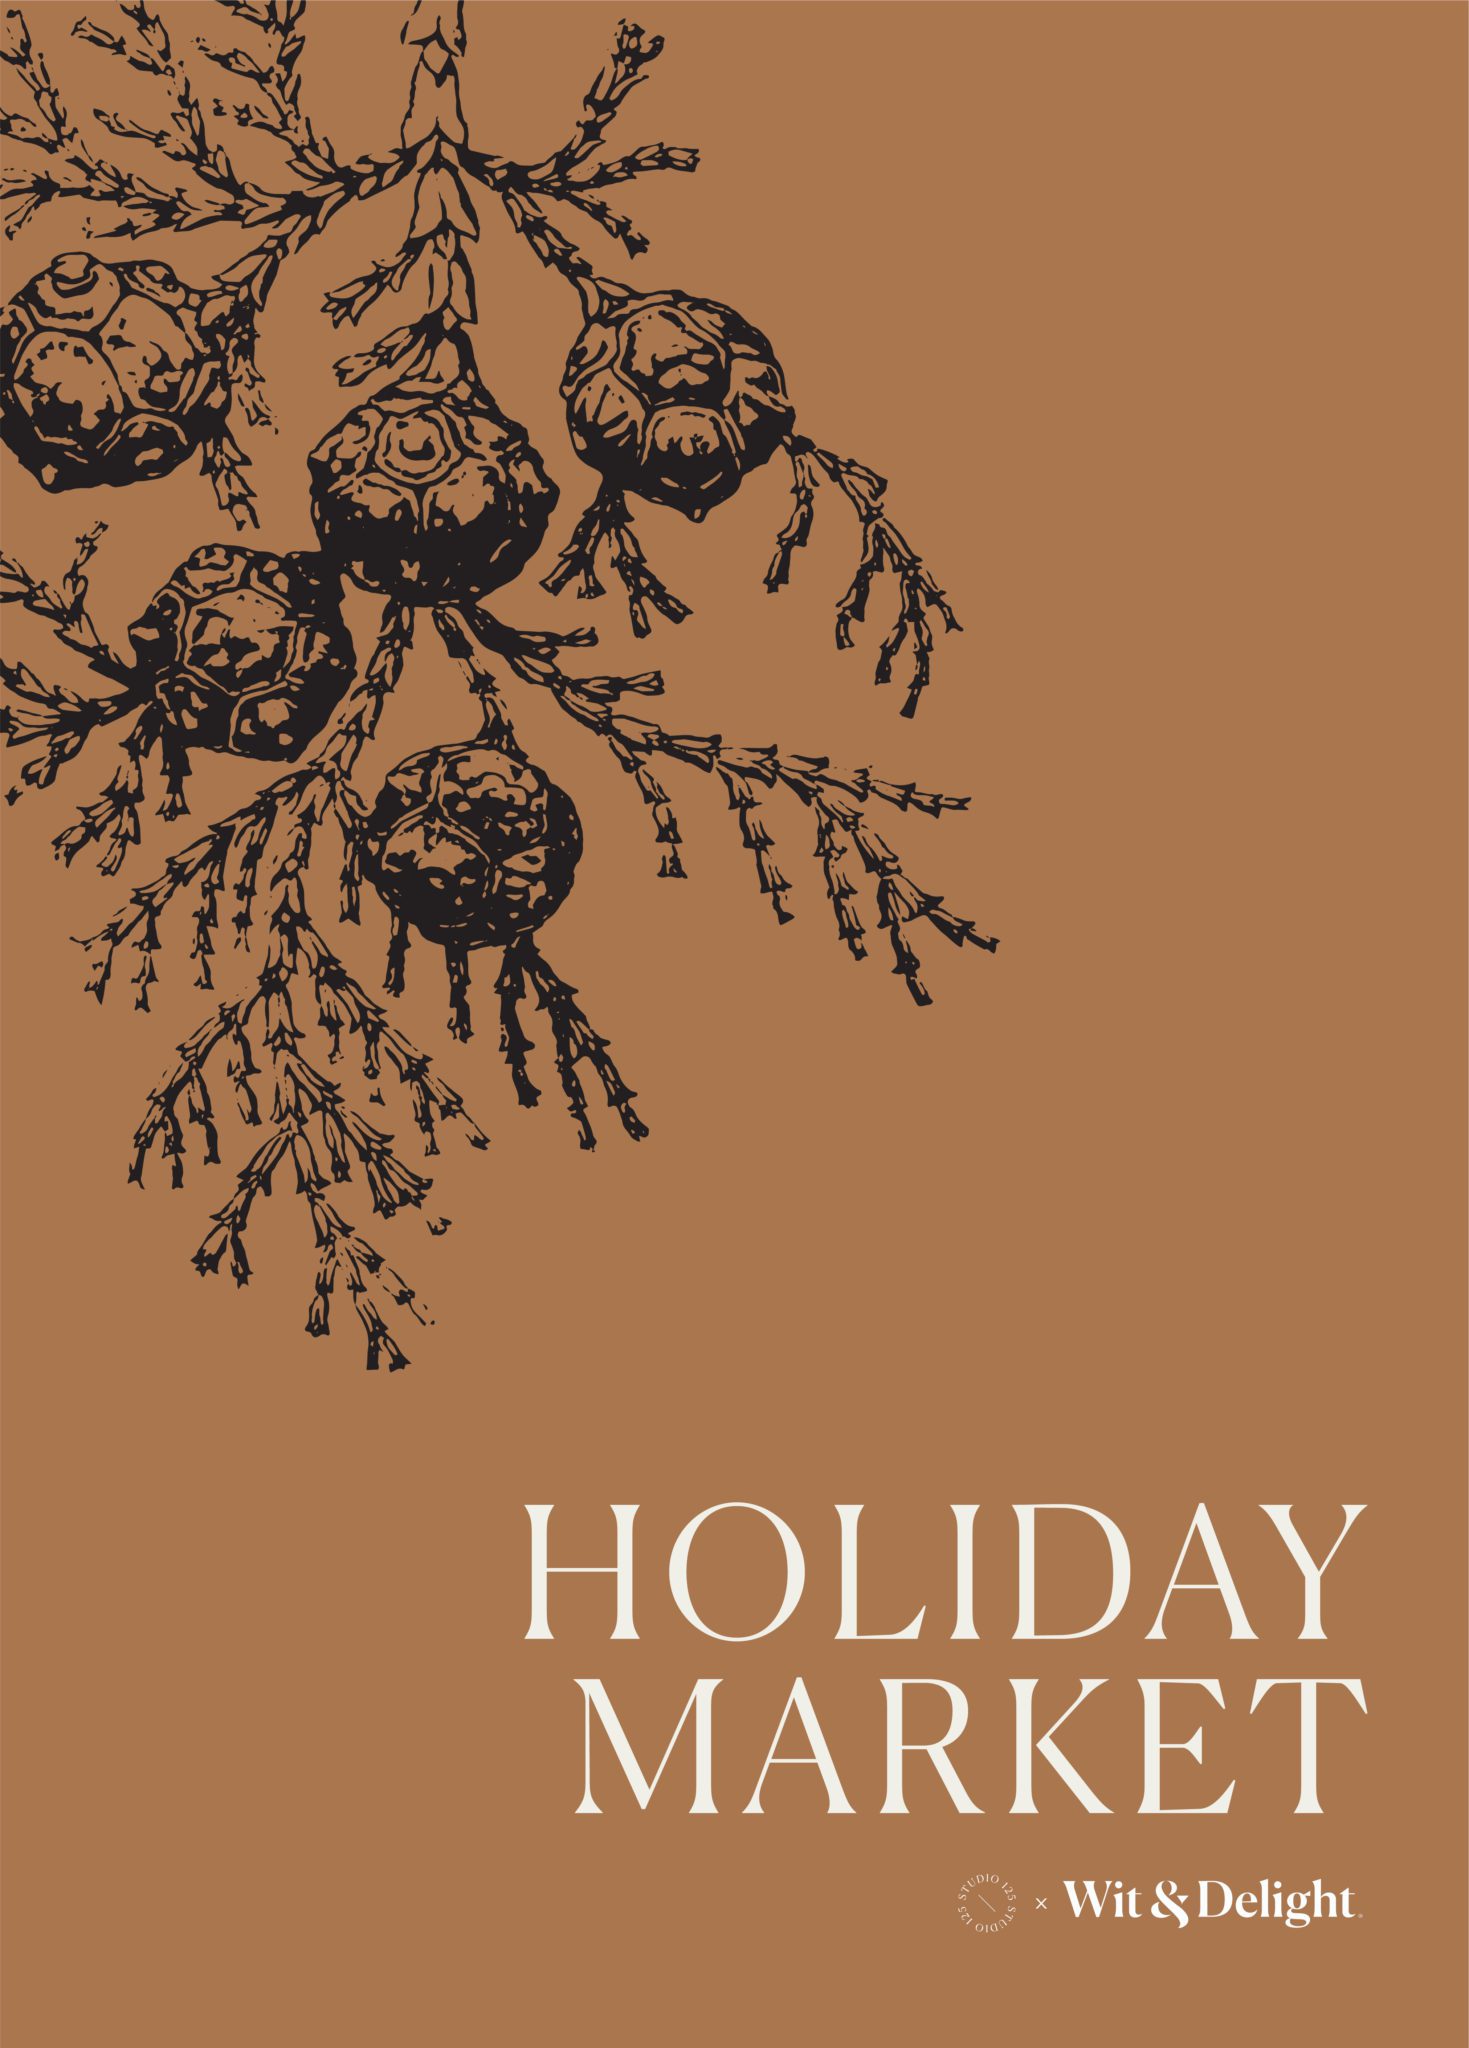 Studio 125 x Wit & Delight Holiday Market! – Wit & Delight